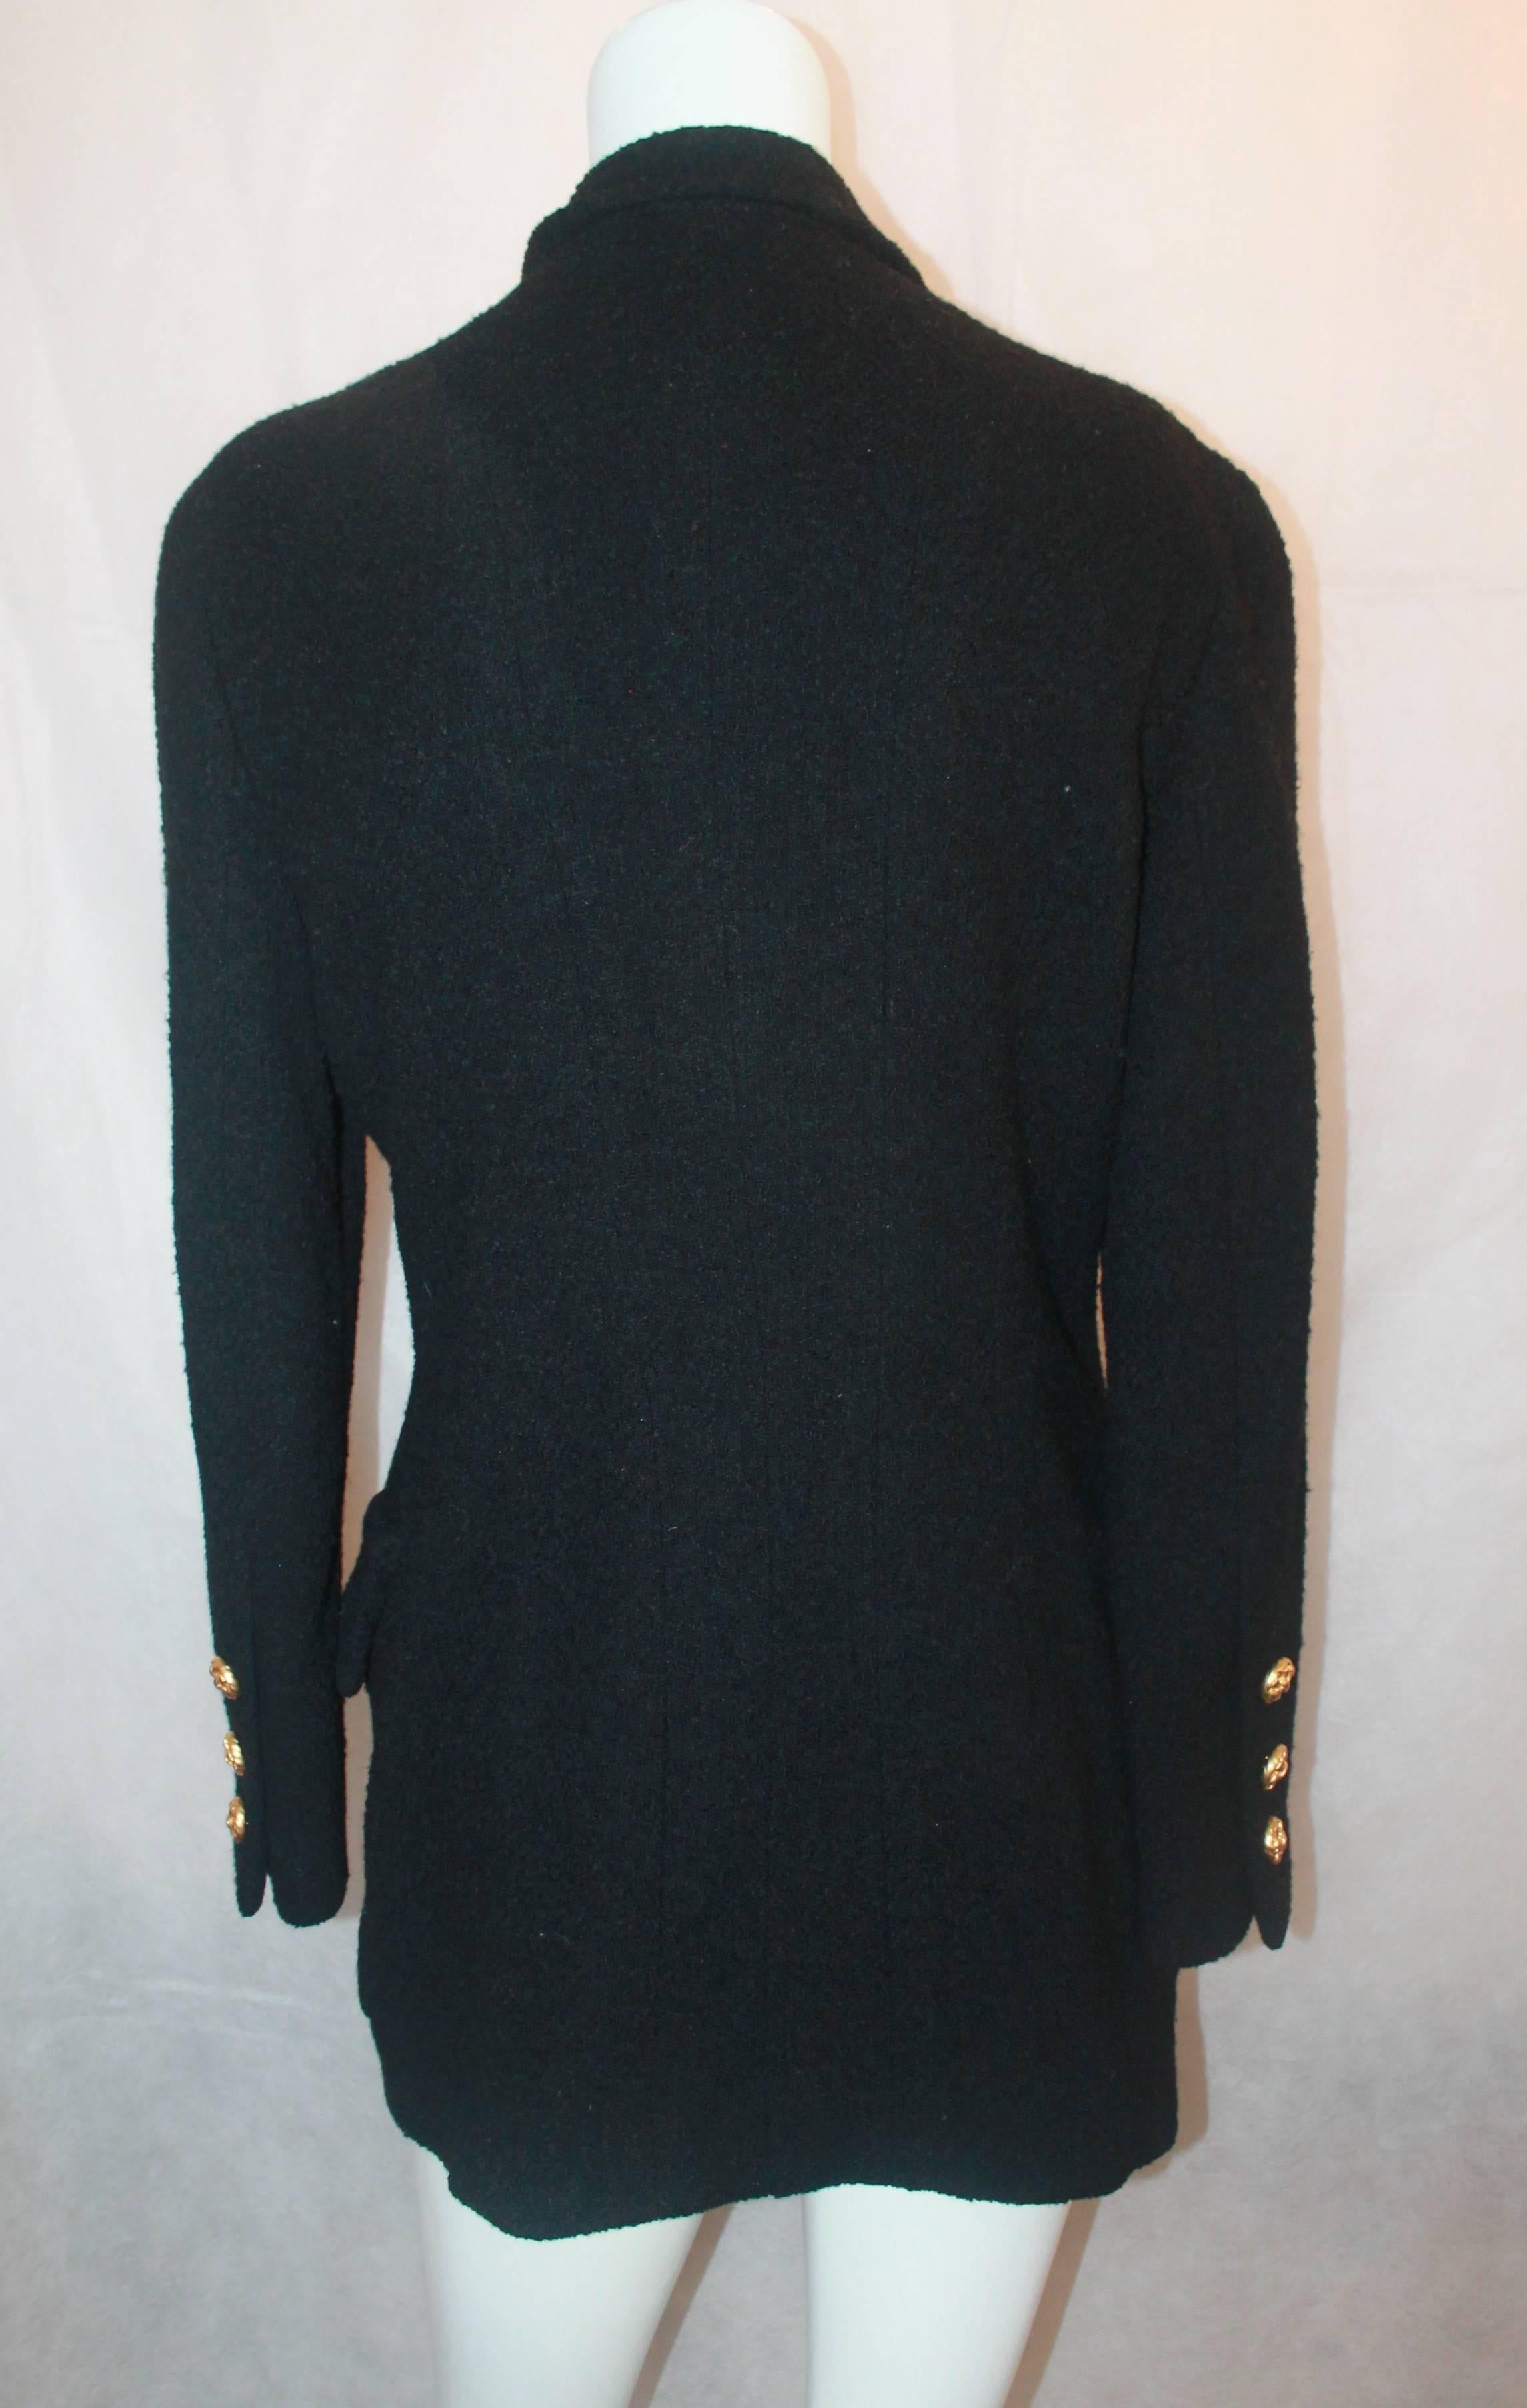 Women's Chanel Vintage Black Wool Long Jacket with Neck Tie - 40 - circa 1980's